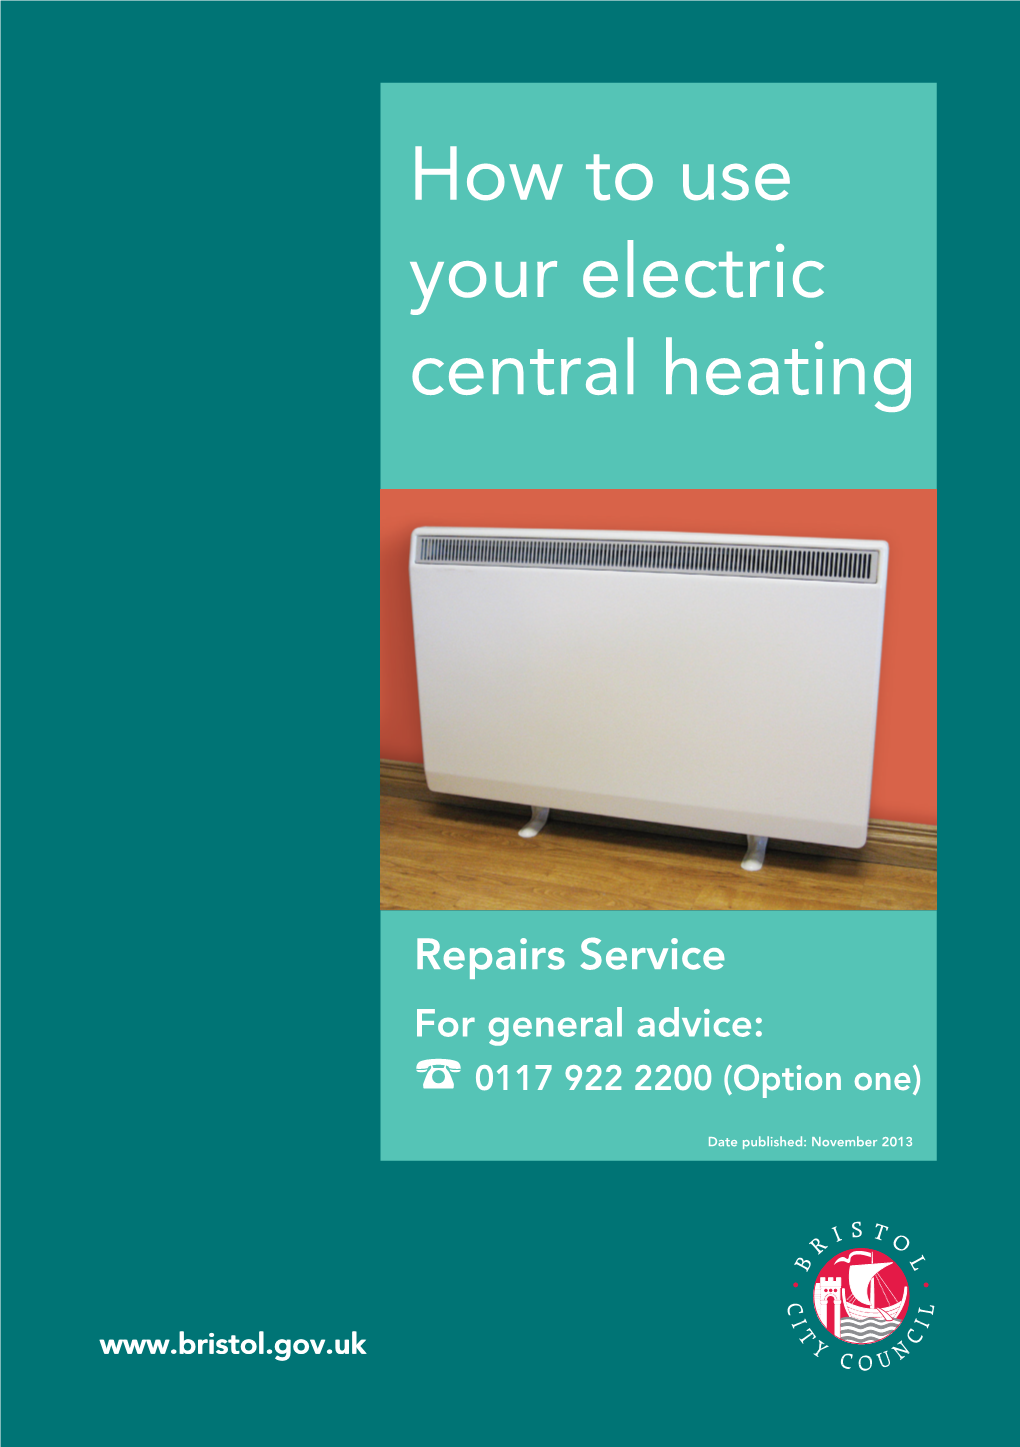 How to Use Your Electric Central Heating